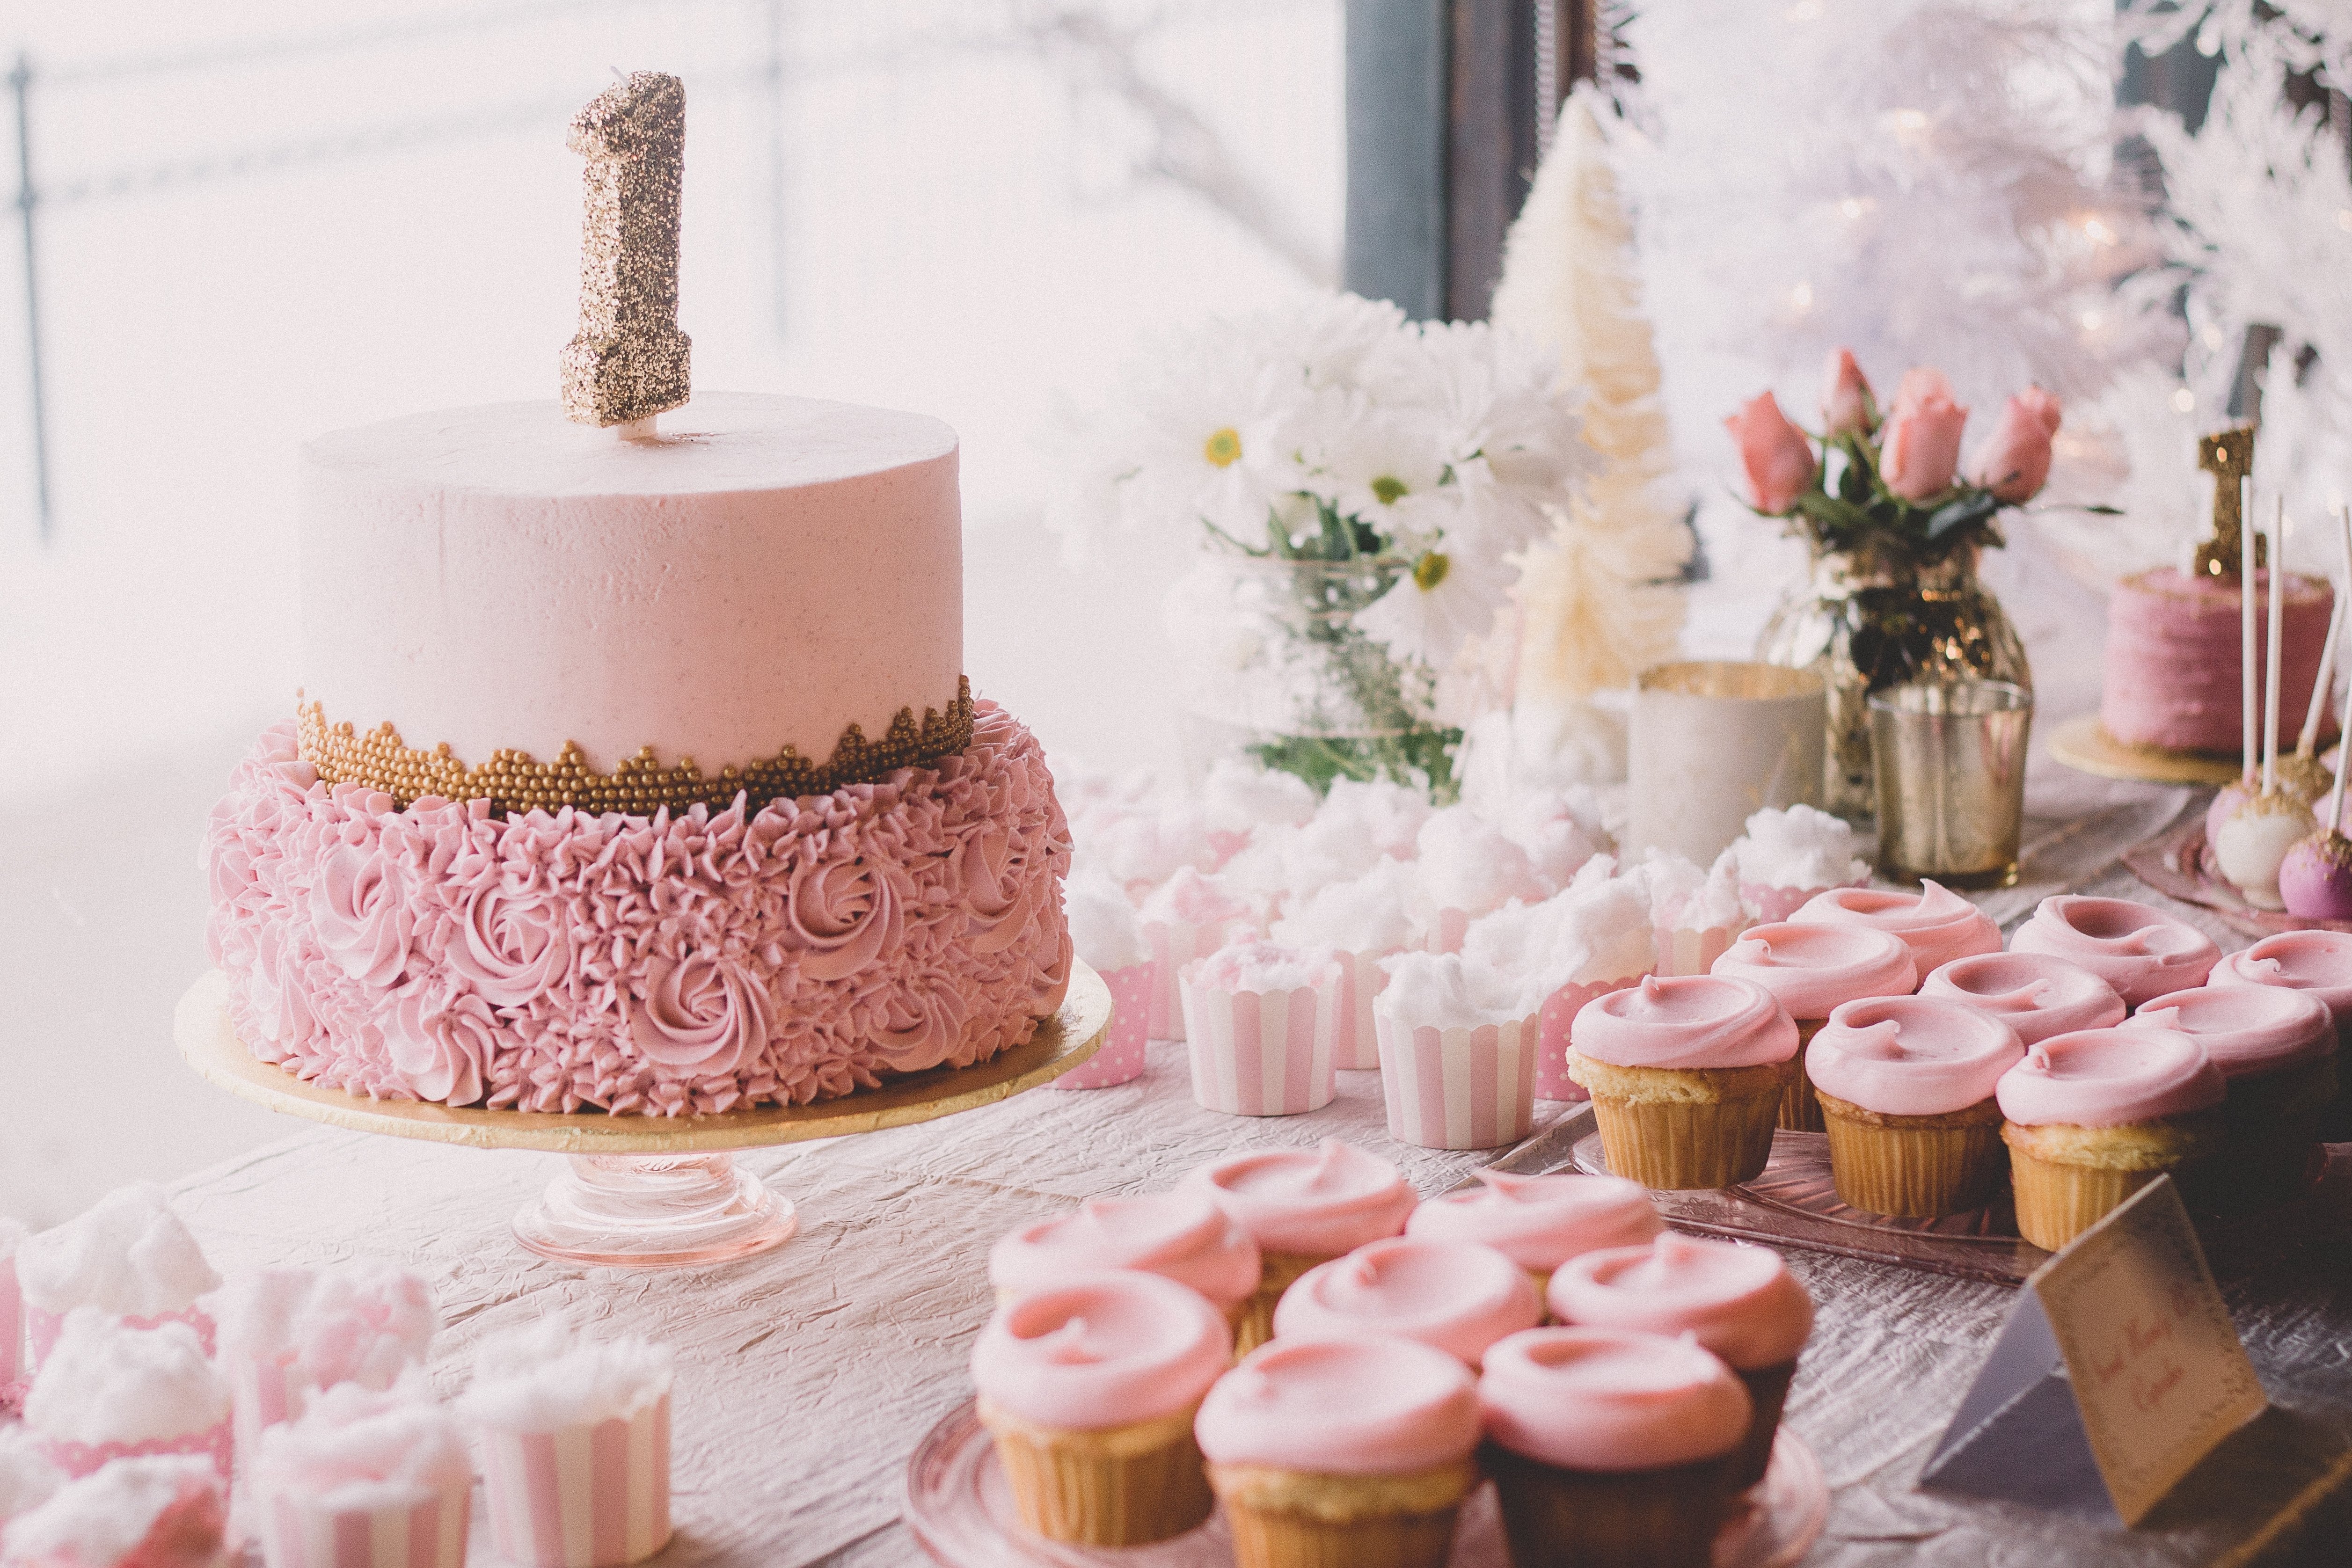 10 Fabulous Winter 1St Birthday Party Ideas january 2015 armourgirl 2022